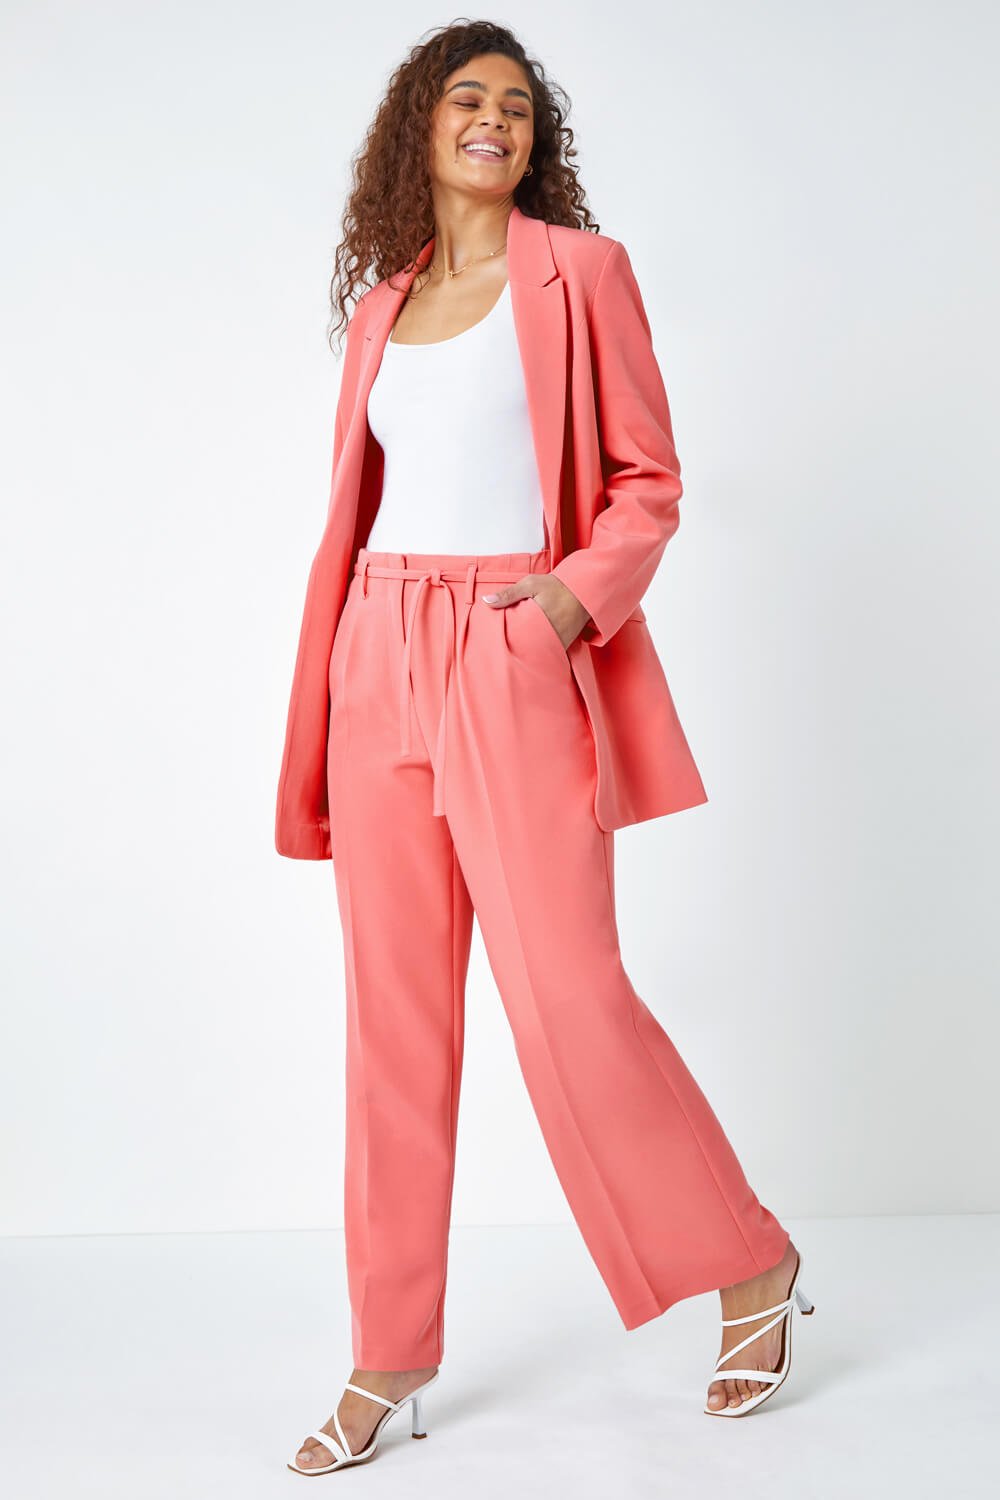 CORAL Crepe Stretch Straight Leg Trousers, Image 2 of 5